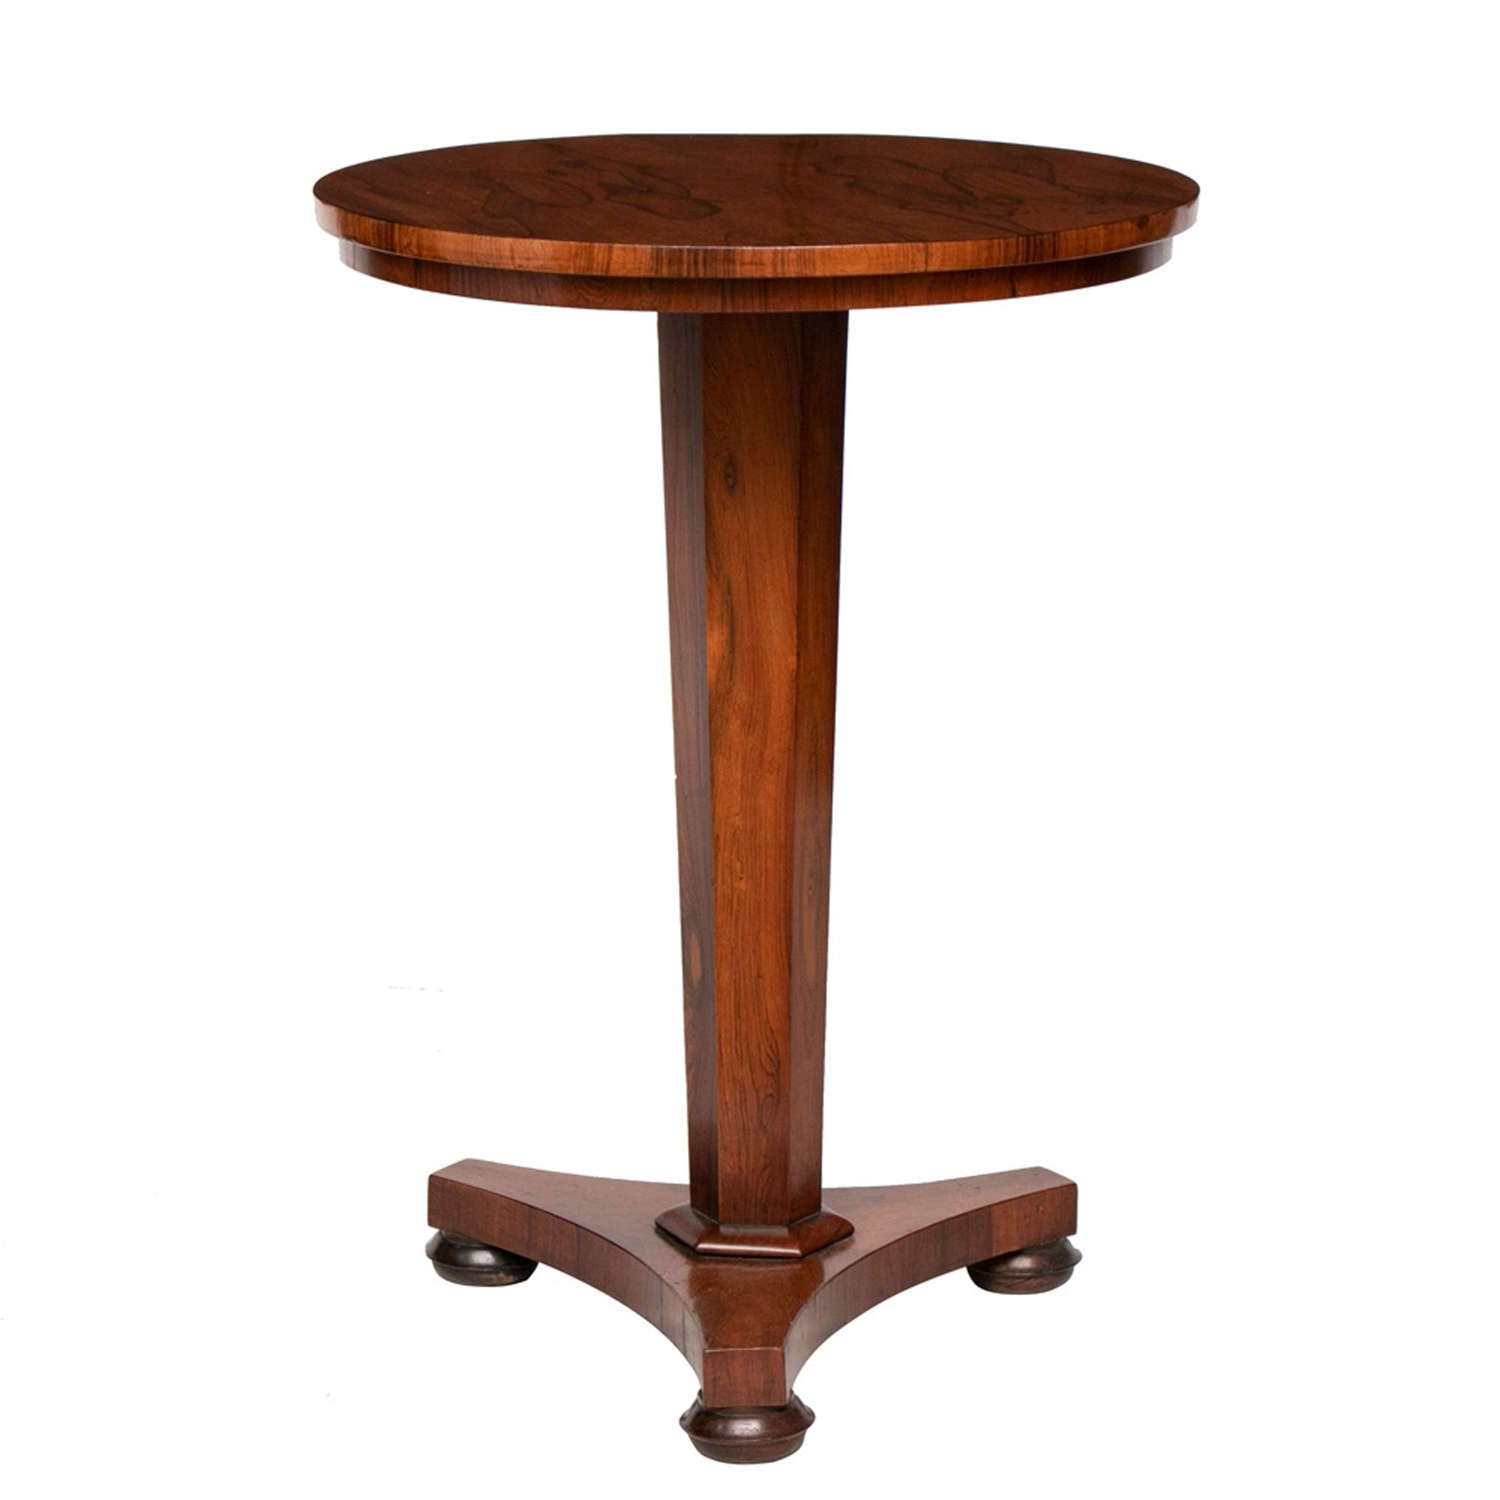 Victorian Rosewood Side Table c.1870